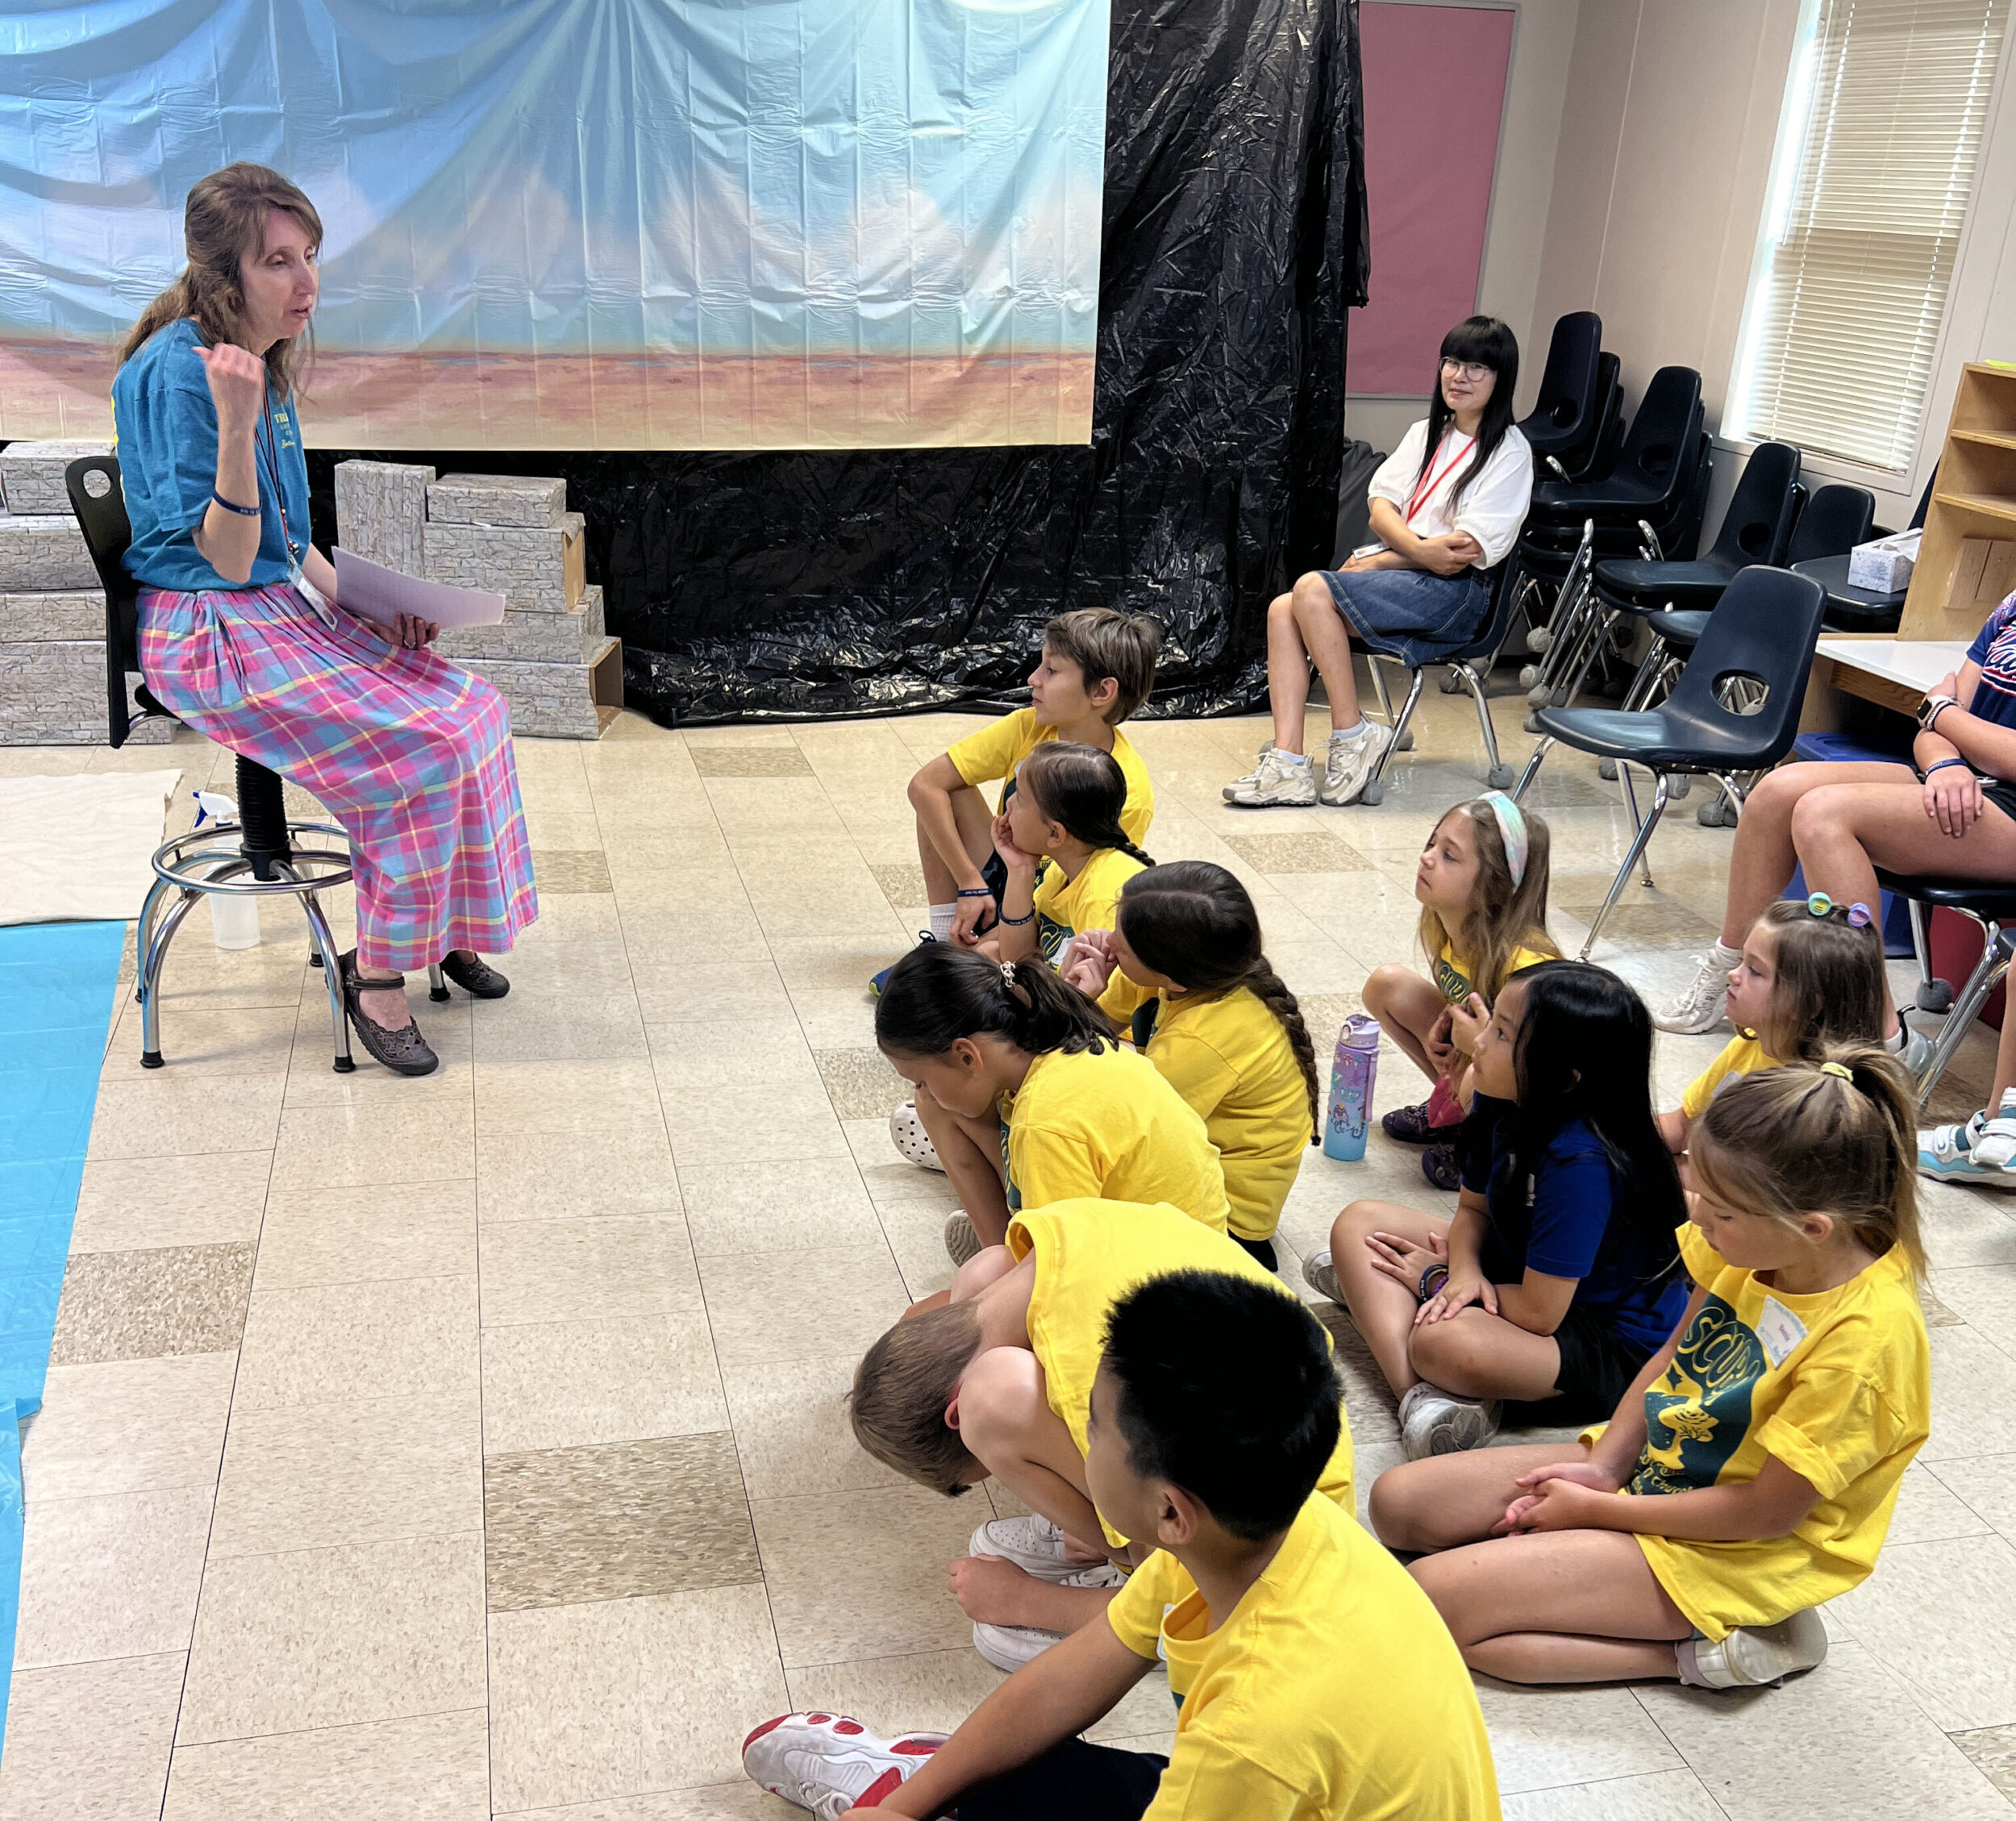 Woman speaking to group of children